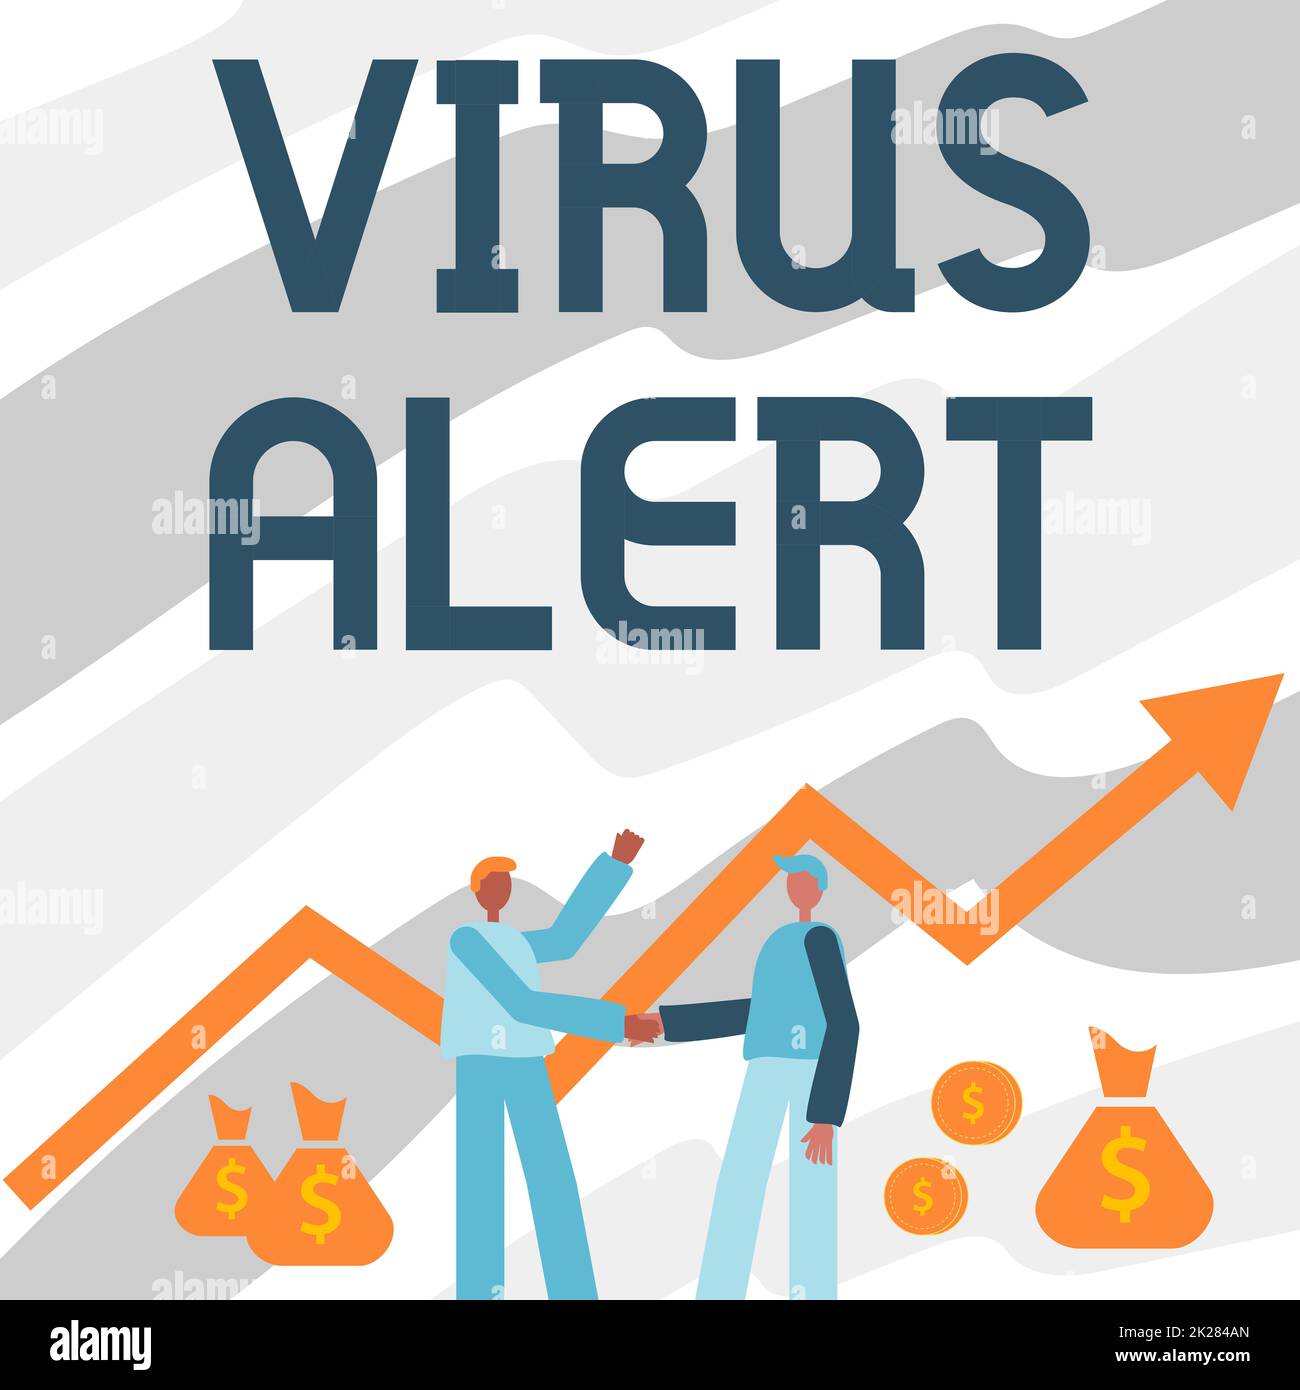 Text showing inspiration Virus Alert. Business overview Virus Alert Two Men Standing Shaking Hands With Financial Arrow For Growth And Money Bags. Stock Photo